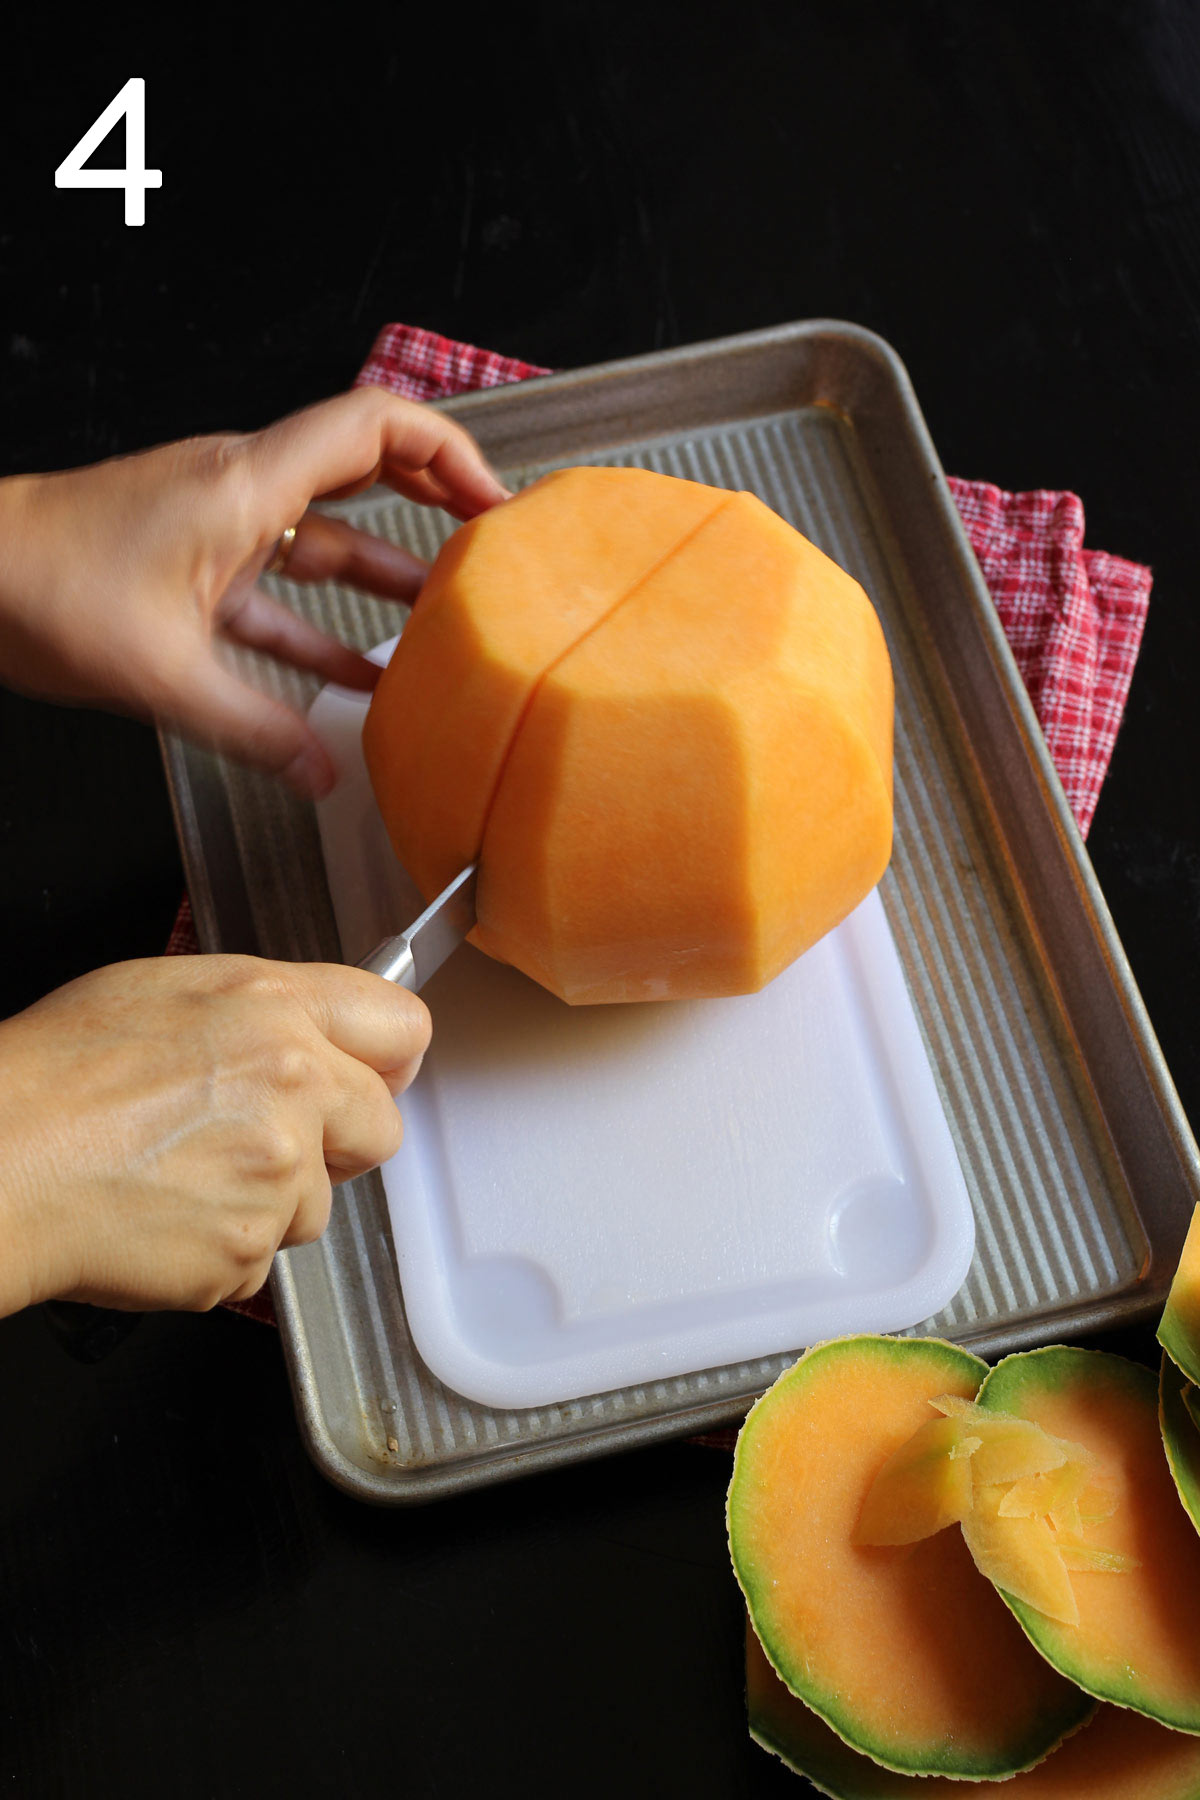 cutting melon in half lengthwise on cutting board within tray.